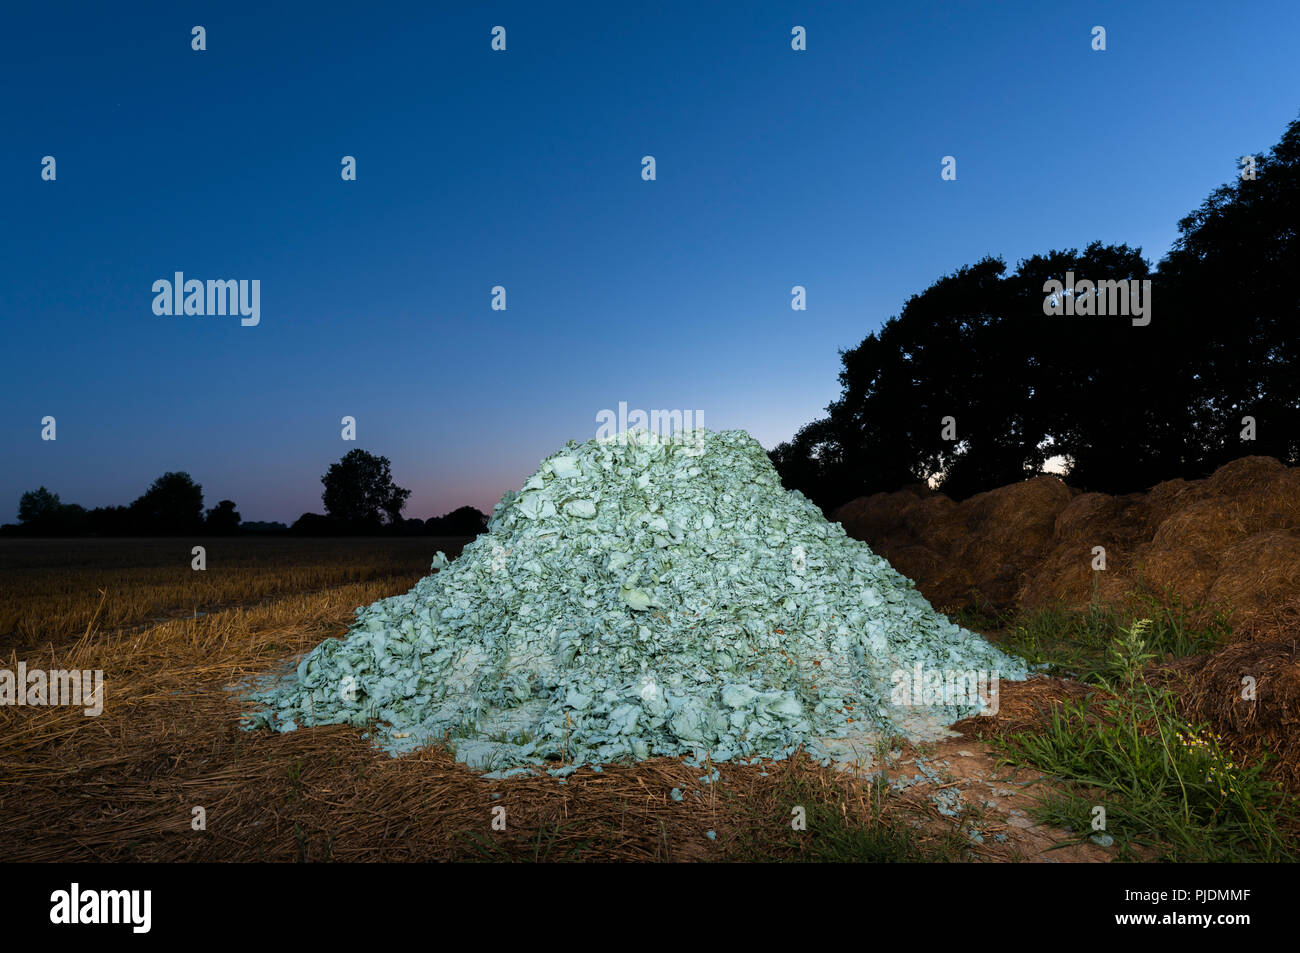 Paper-maché used to screen piles of manure Stock Photo